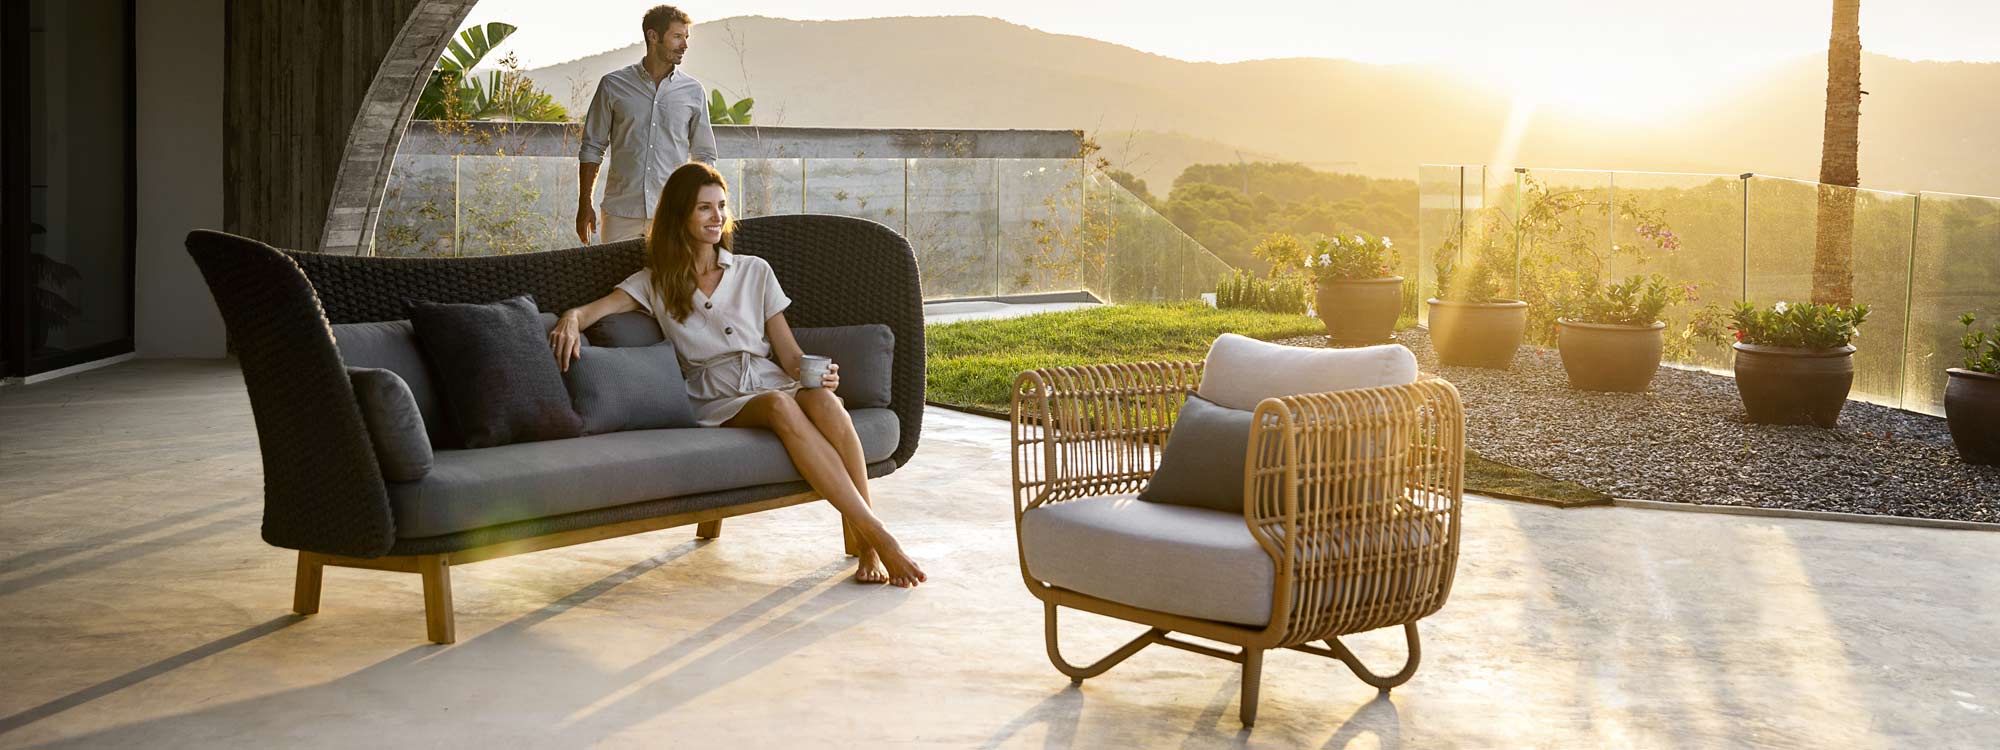 Image of sunset terrace with woman sat on Caneline Peacock Wing dark grey garden sofa next to Nest synthetic cane lounge chair